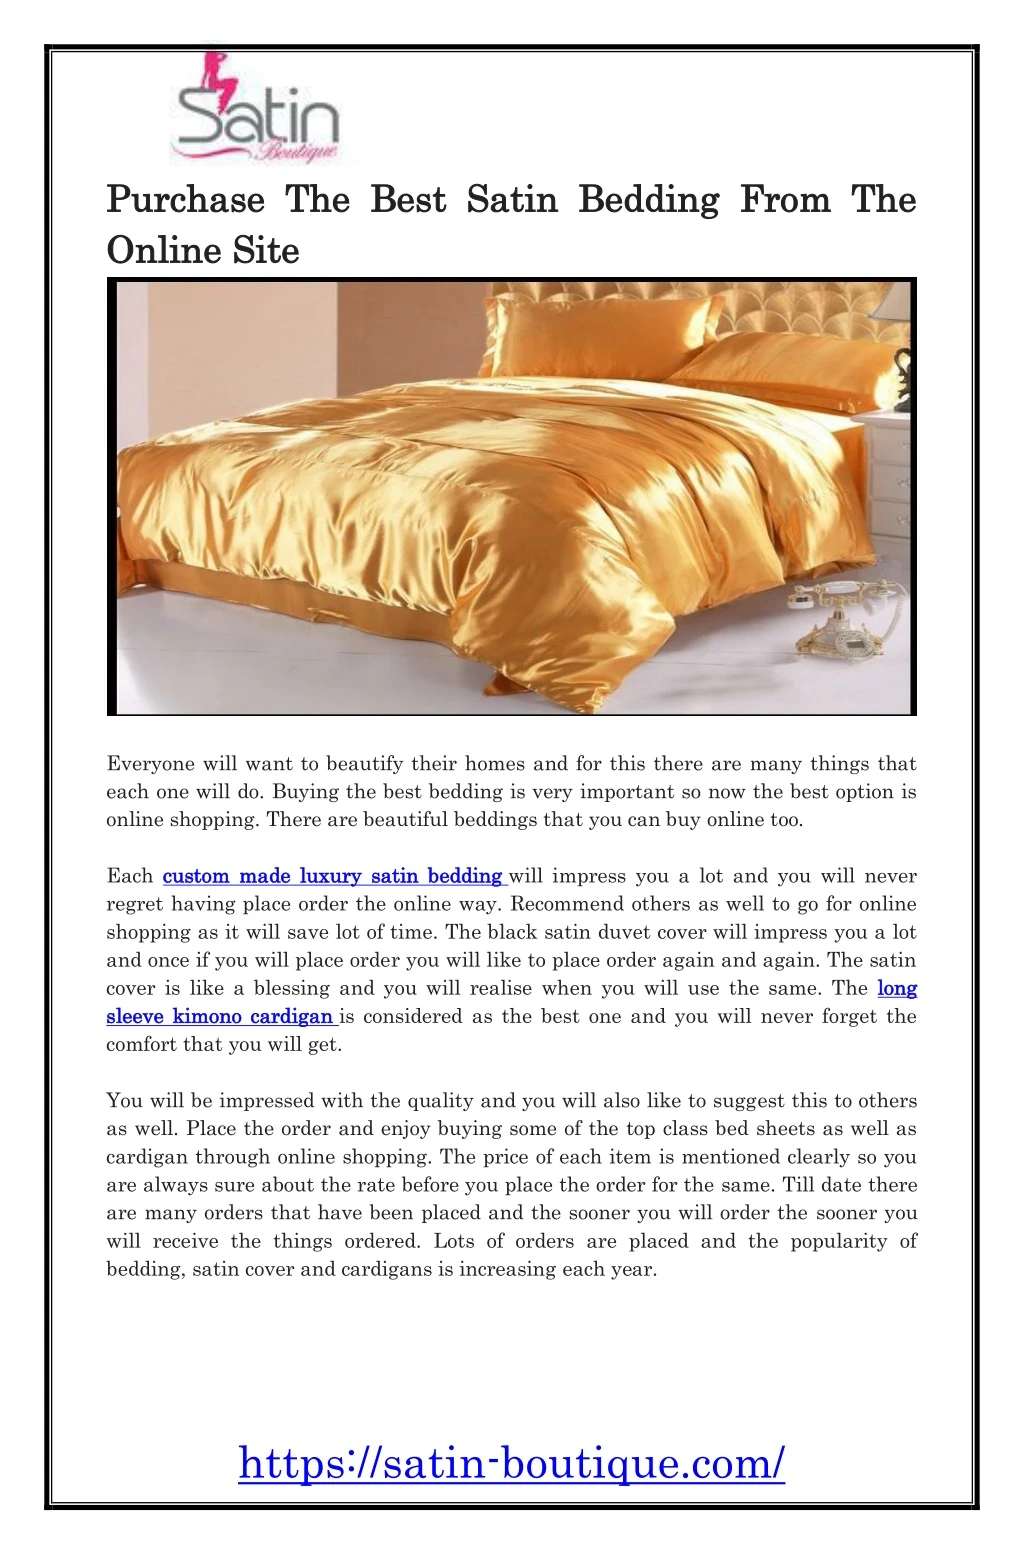 purchase purchase the best satin bedding from n.